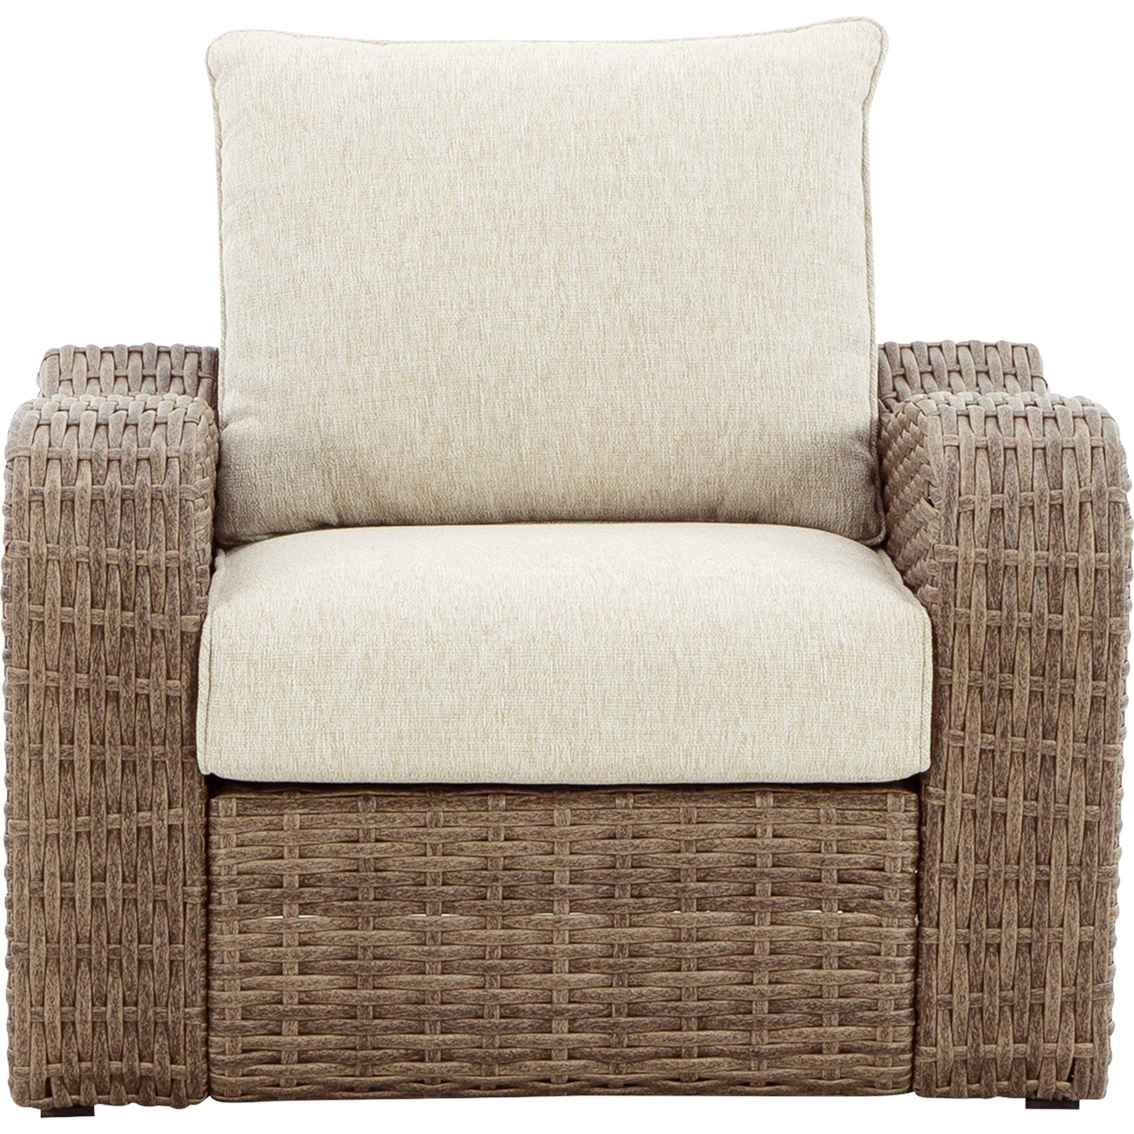 Signature Design by Ashley Sandy Bloom Lounge Chair with Cushion - Image 2 of 6